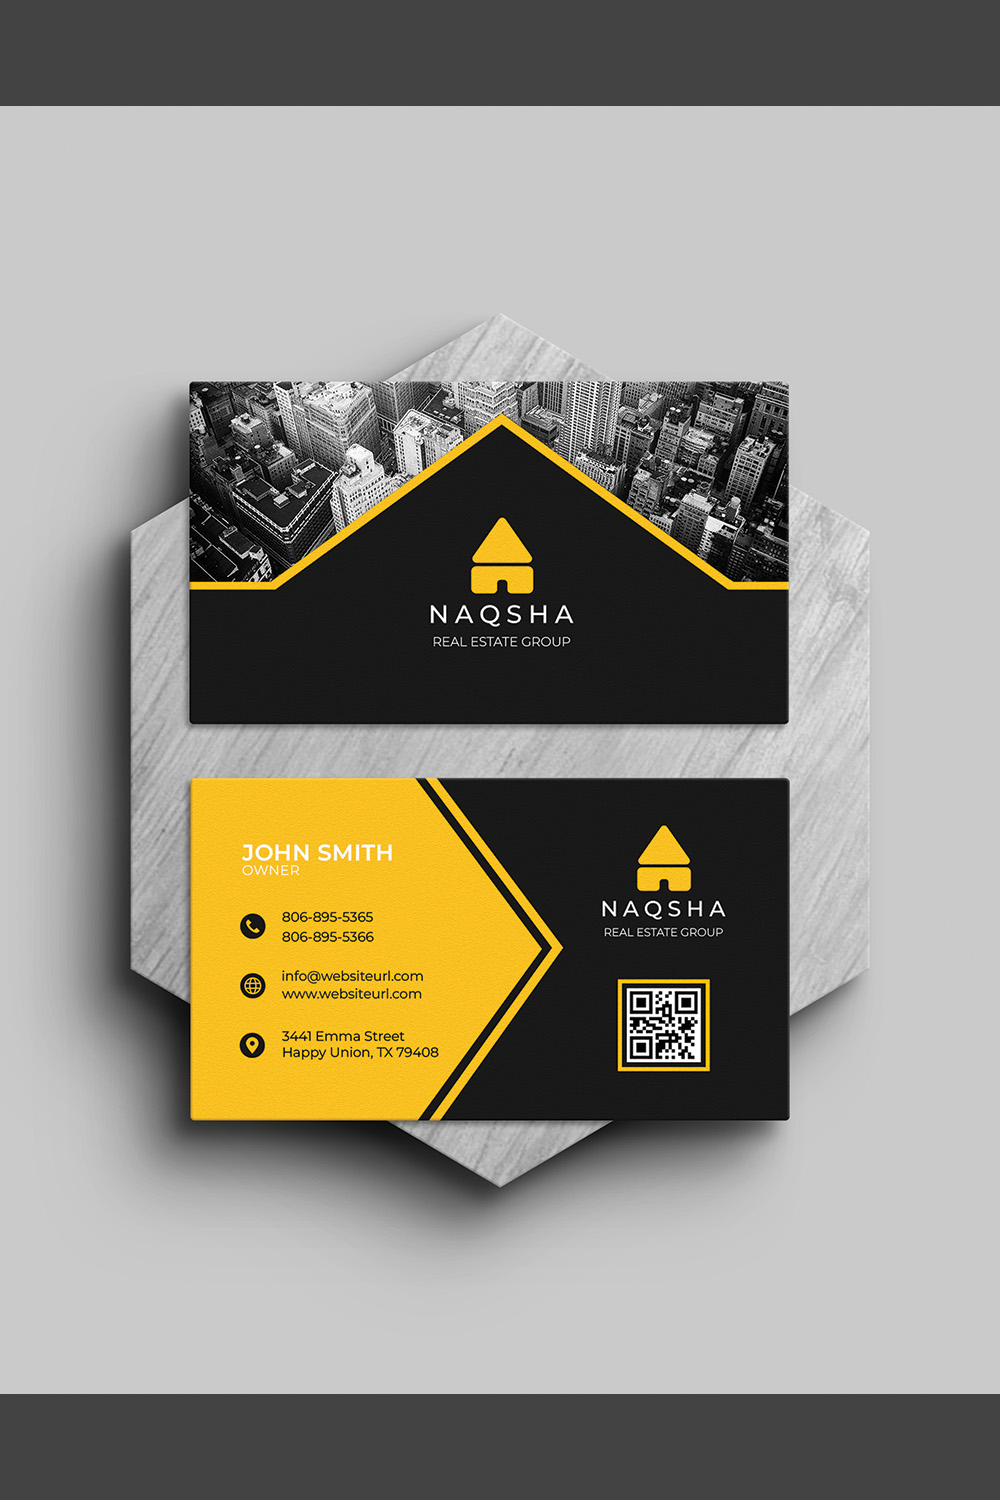 Image of an elegant business card template in black yellow.